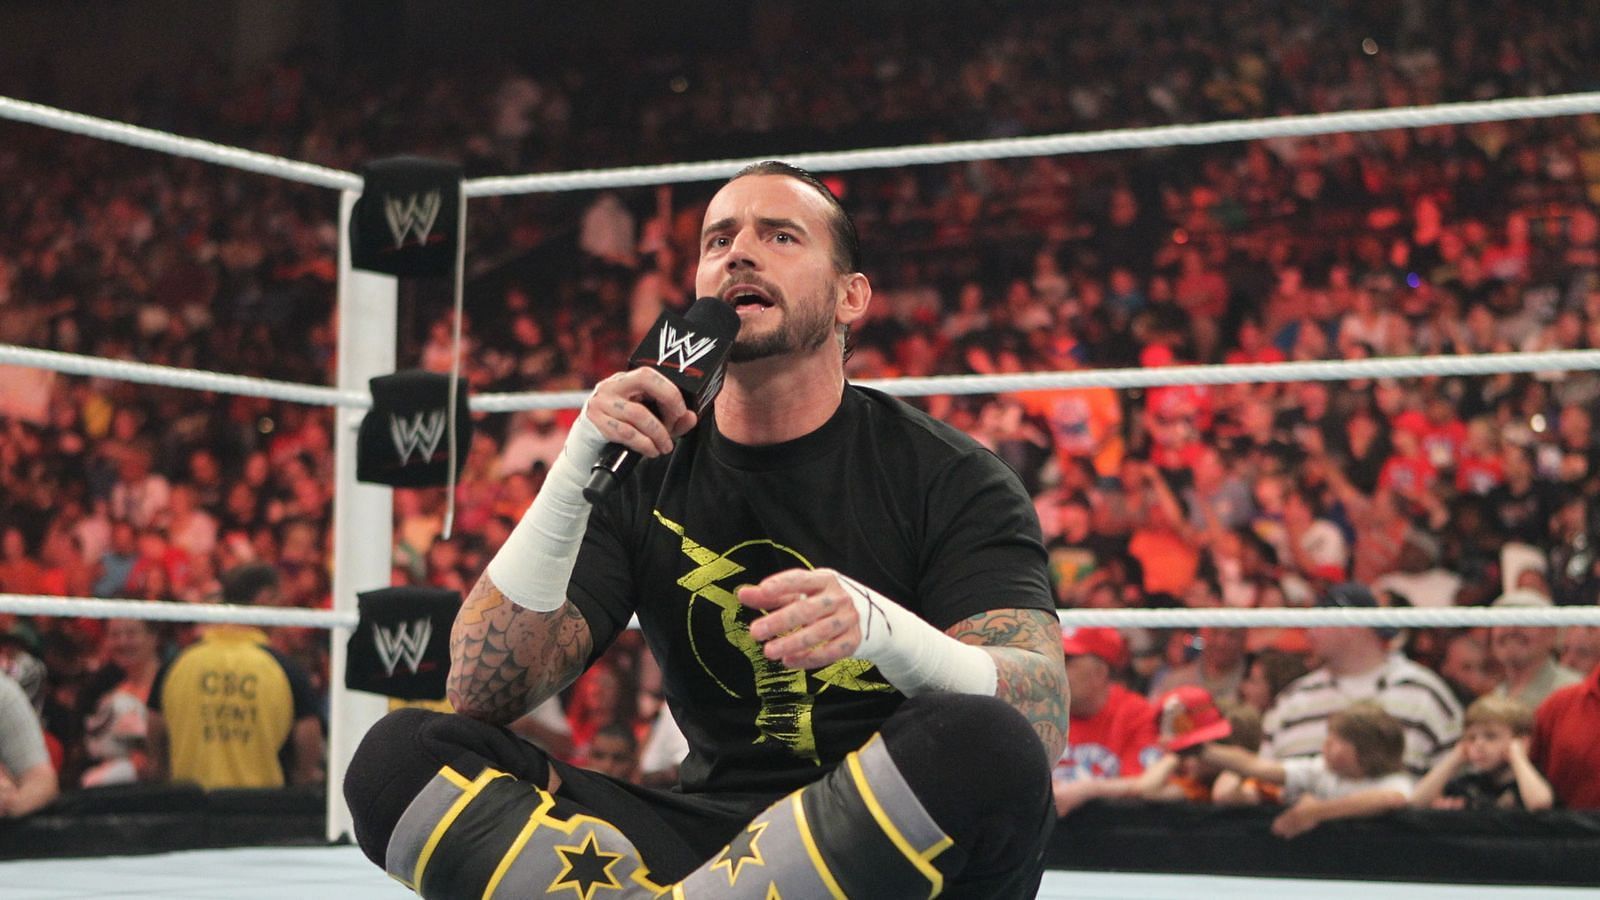 Punk may have inked his last deal as a full-time performer.